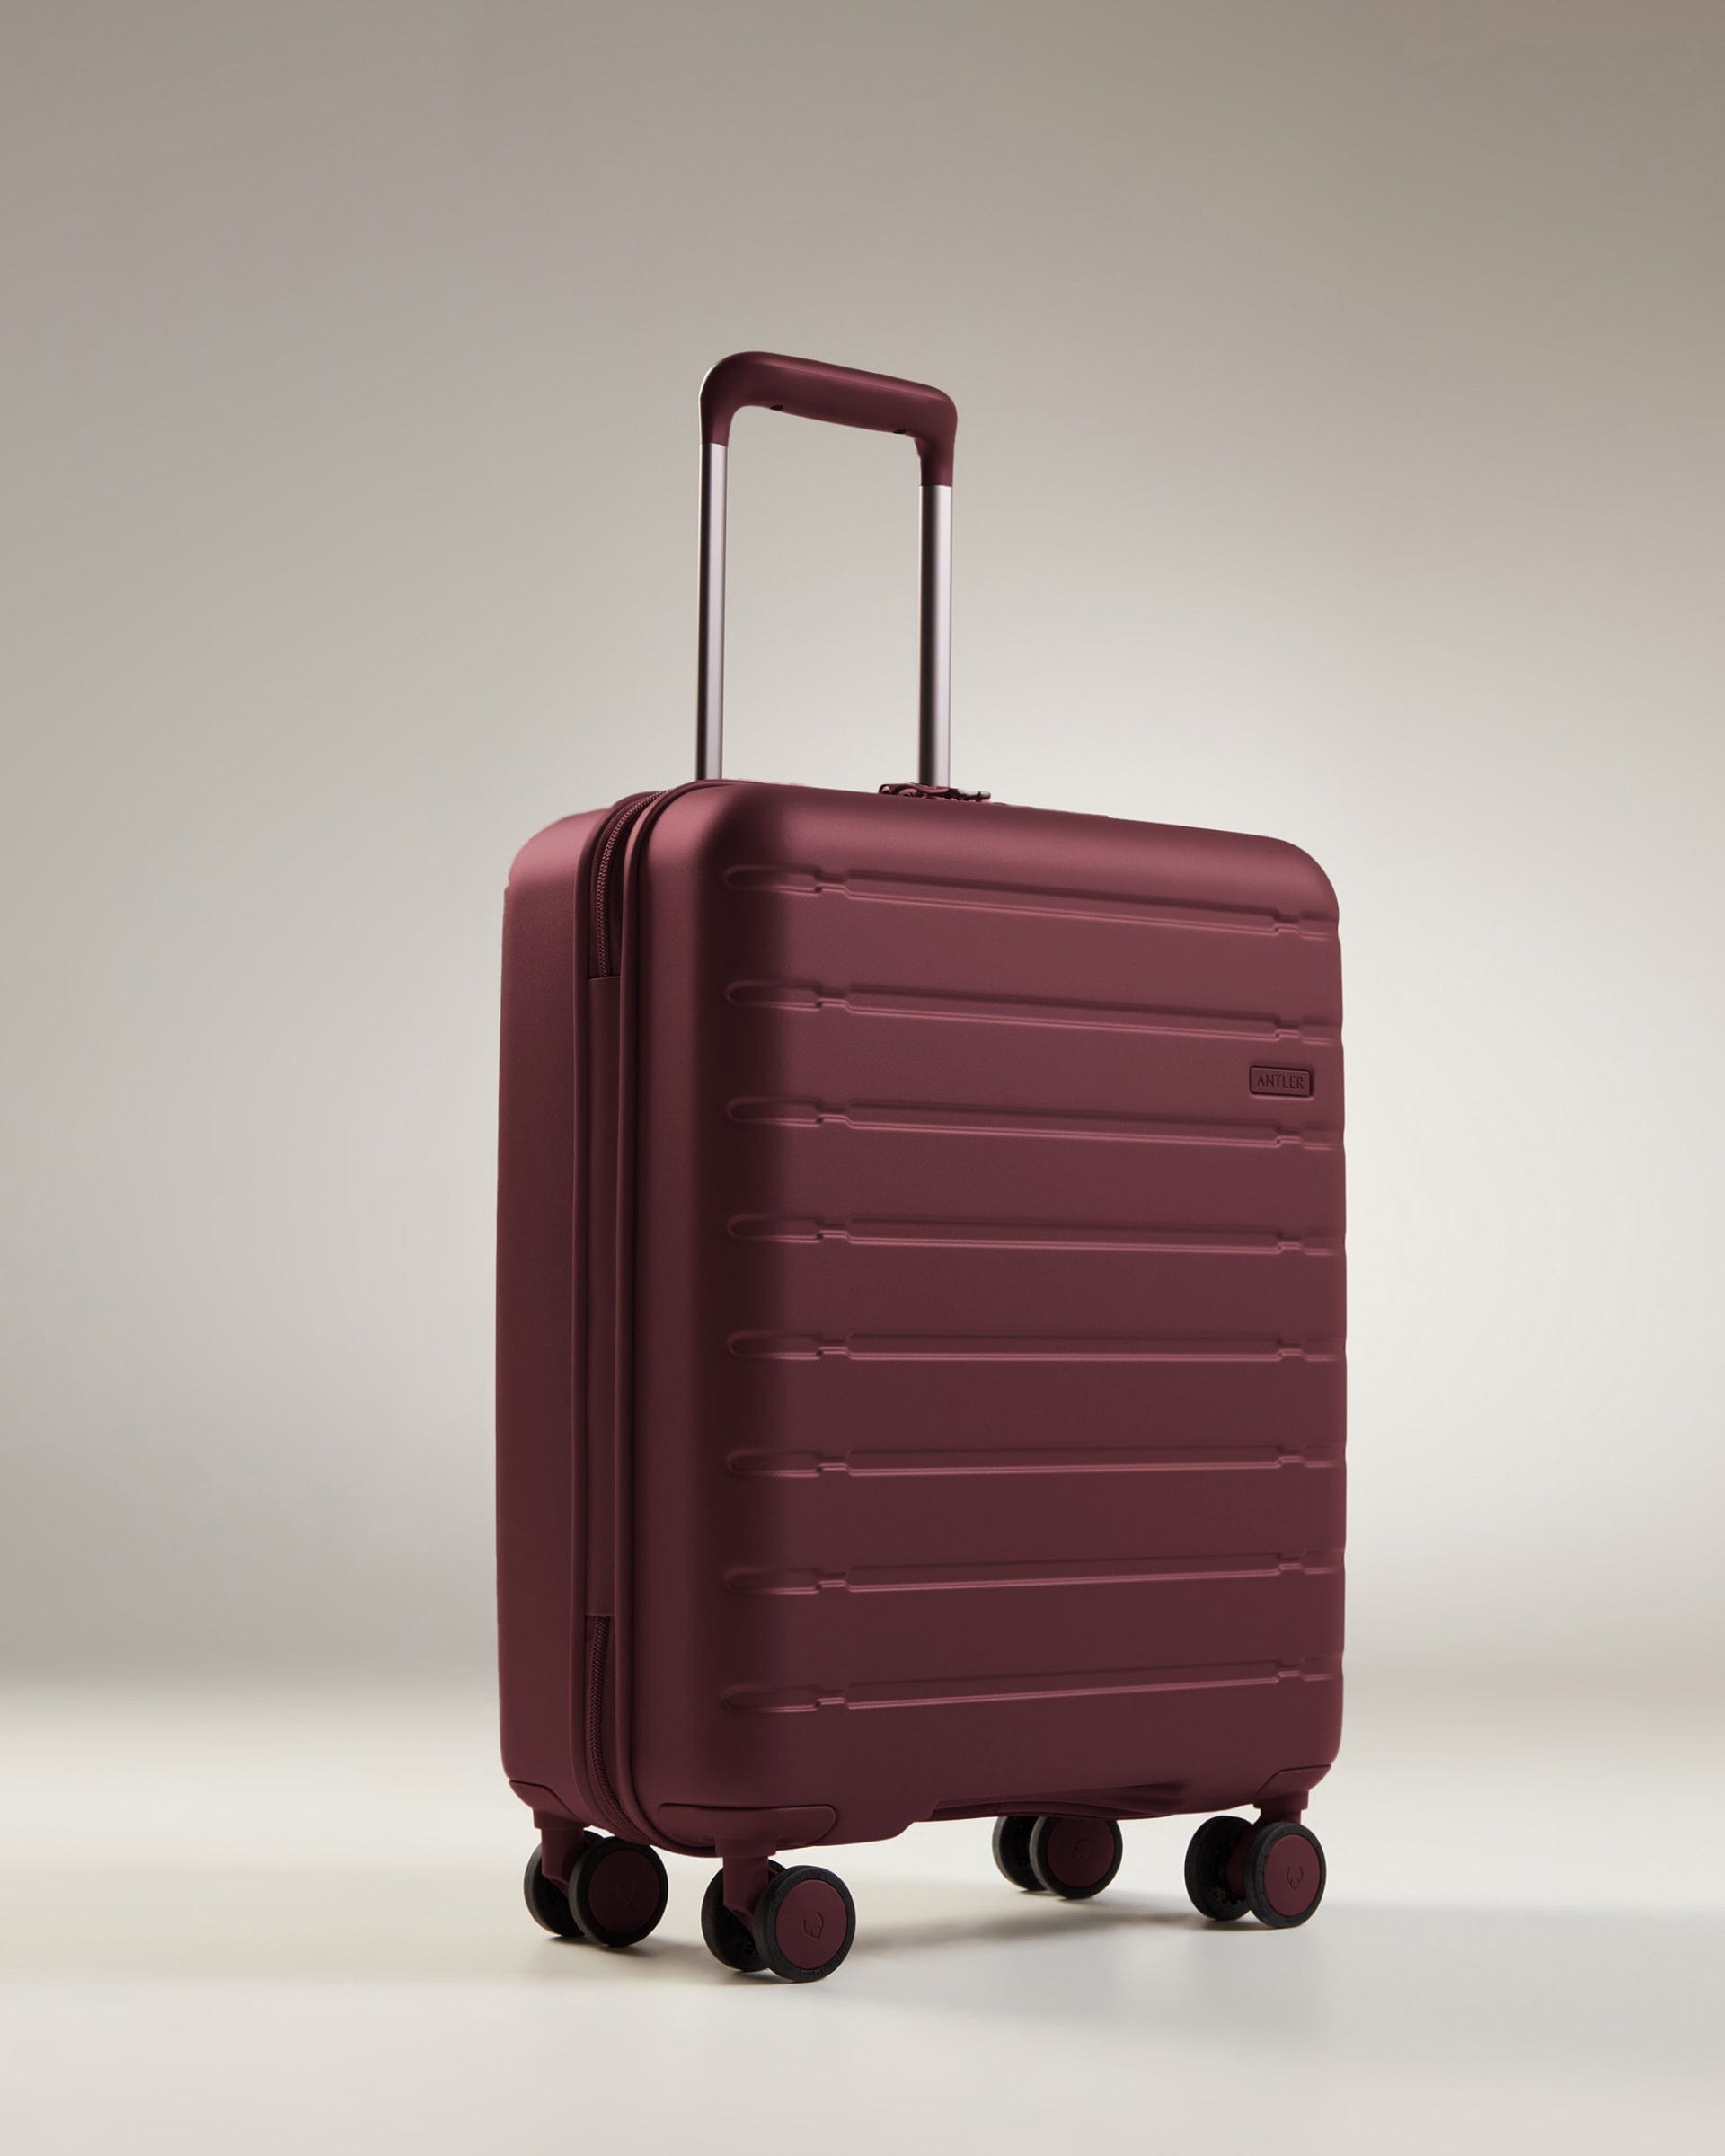 View Antler Stamford 20 Cabin Suitcase In Berry Red Size 20cm x 402cm x 541cm information